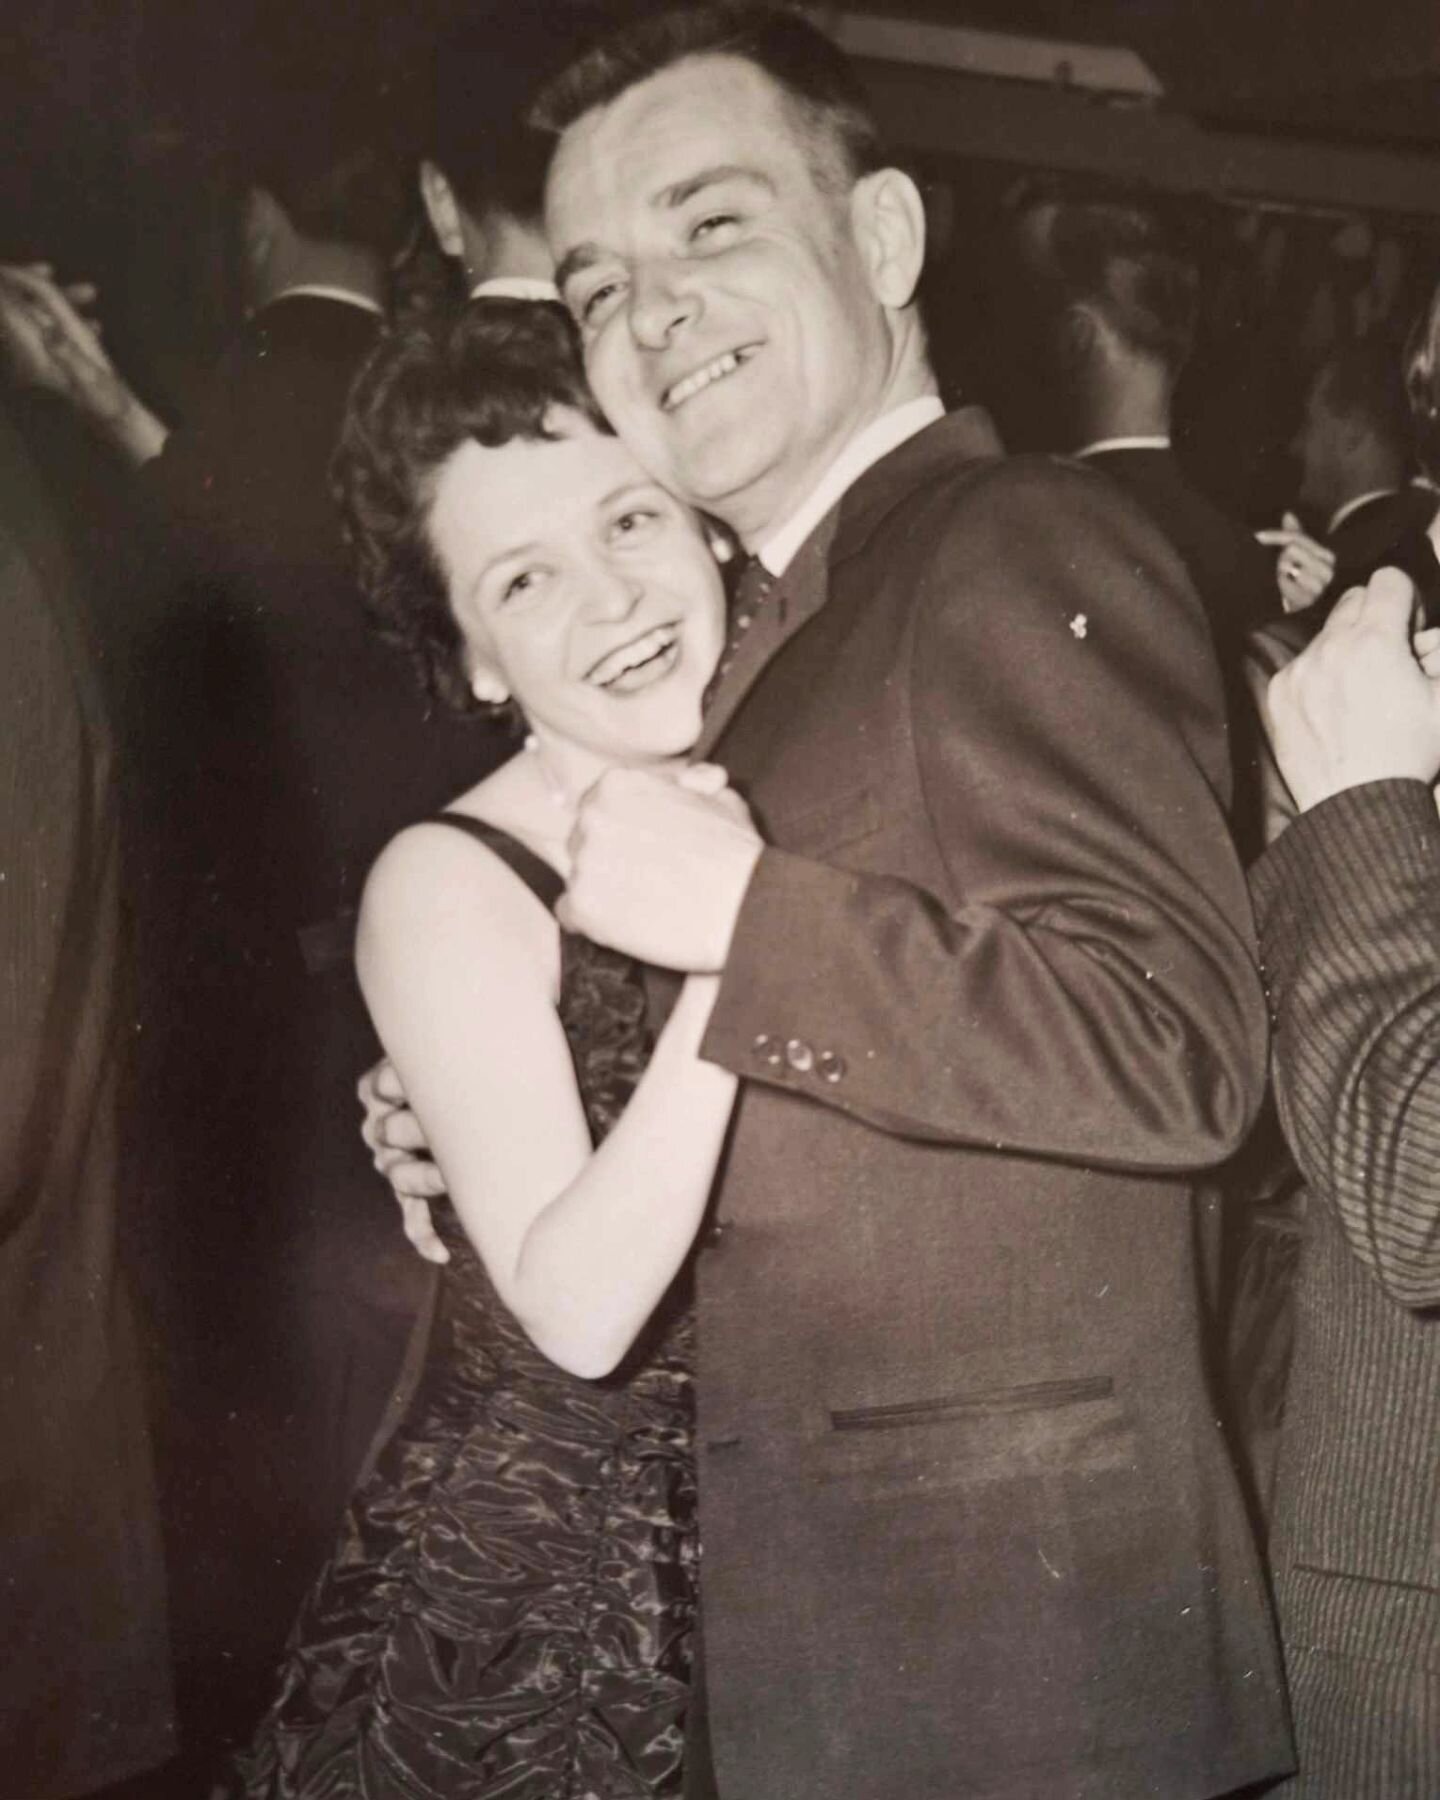 My parents, as I've never seen them before. 
When I was born, my parents were 35 and 34 years old. In this picture, they're in their 20s. Young, in love, vibrant and full of promise. 
So fitting that I get this picture sent as a private message from 